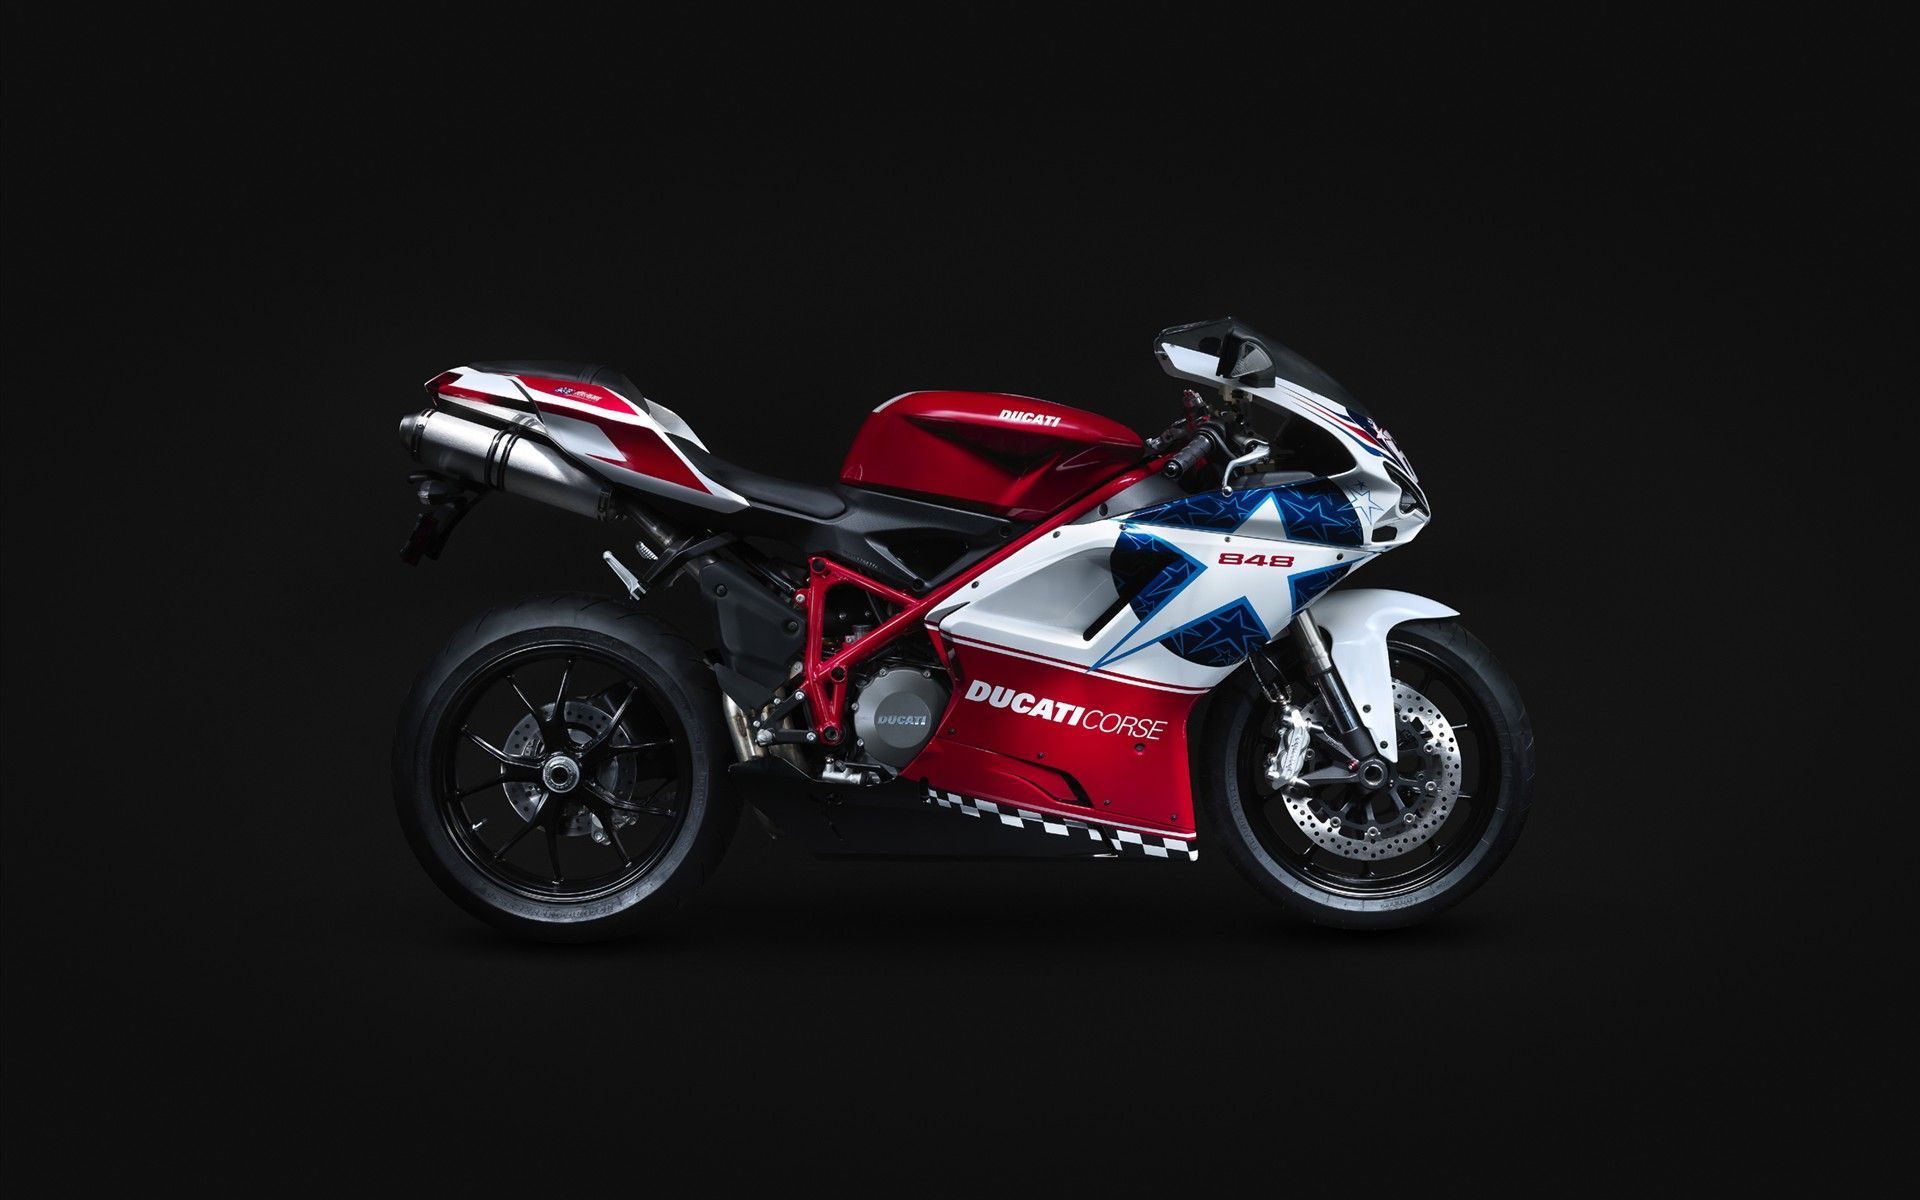 Wallpapers Tagged With DUCATI | DUCATI HD Wallpapers | Page 1